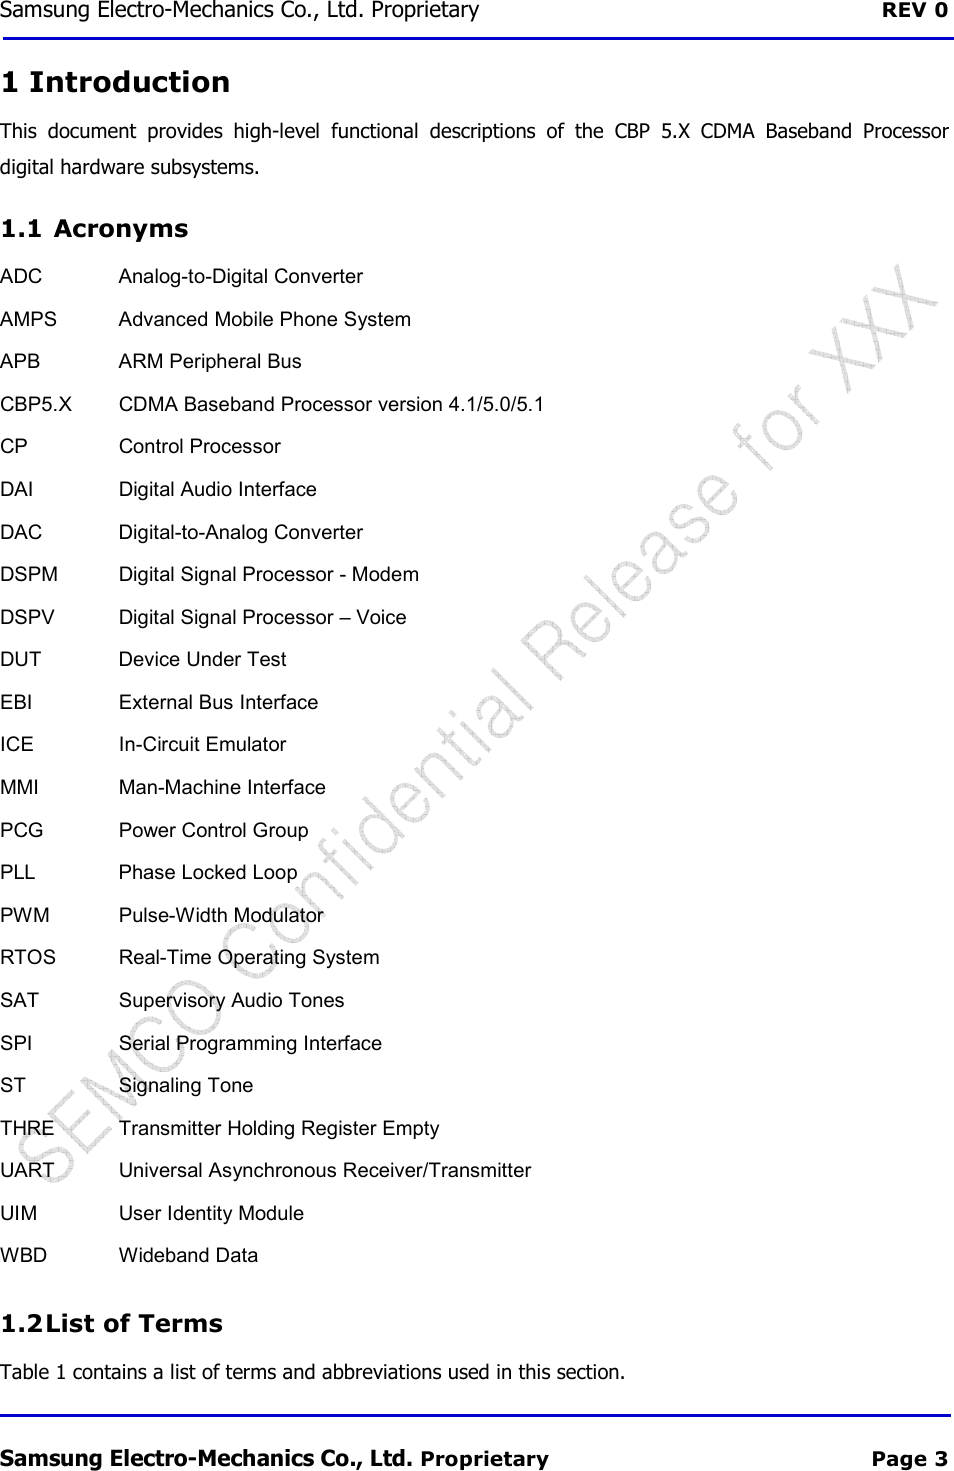 Samsung Electro-Mechanics Co., Ltd. Proprietary  REV 0 Samsung Electro-Mechanics Co., Ltd. Proprietary  Page 3 1 Introduction This  document  provides  high-level  functional  descriptions  of  the  CBP  5.X  CDMA  Baseband  Processor digital hardware subsystems. 1.1  Acronyms ADC  Analog-to-Digital Converter AMPS  Advanced Mobile Phone System APB  ARM Peripheral Bus CBP5.X  CDMA Baseband Processor version 4.1/5.0/5.1 CP  Control Processor DAI  Digital Audio Interface DAC  Digital-to-Analog Converter DSPM  Digital Signal Processor - Modem DSPV  Digital Signal Processor – Voice DUT  Device Under Test EBI  External Bus Interface ICE  In-Circuit Emulator MMI  Man-Machine Interface PCG  Power Control Group PLL  Phase Locked Loop PWM  Pulse-Width Modulator RTOS  Real-Time Operating System SAT  Supervisory Audio Tones   SPI  Serial Programming Interface ST  Signaling Tone THRE  Transmitter Holding Register Empty UART  Universal Asynchronous Receiver/Transmitter UIM  User Identity Module WBD  Wideband Data 1.2 List of Terms Table 1 contains a list of terms and abbreviations used in this section. 